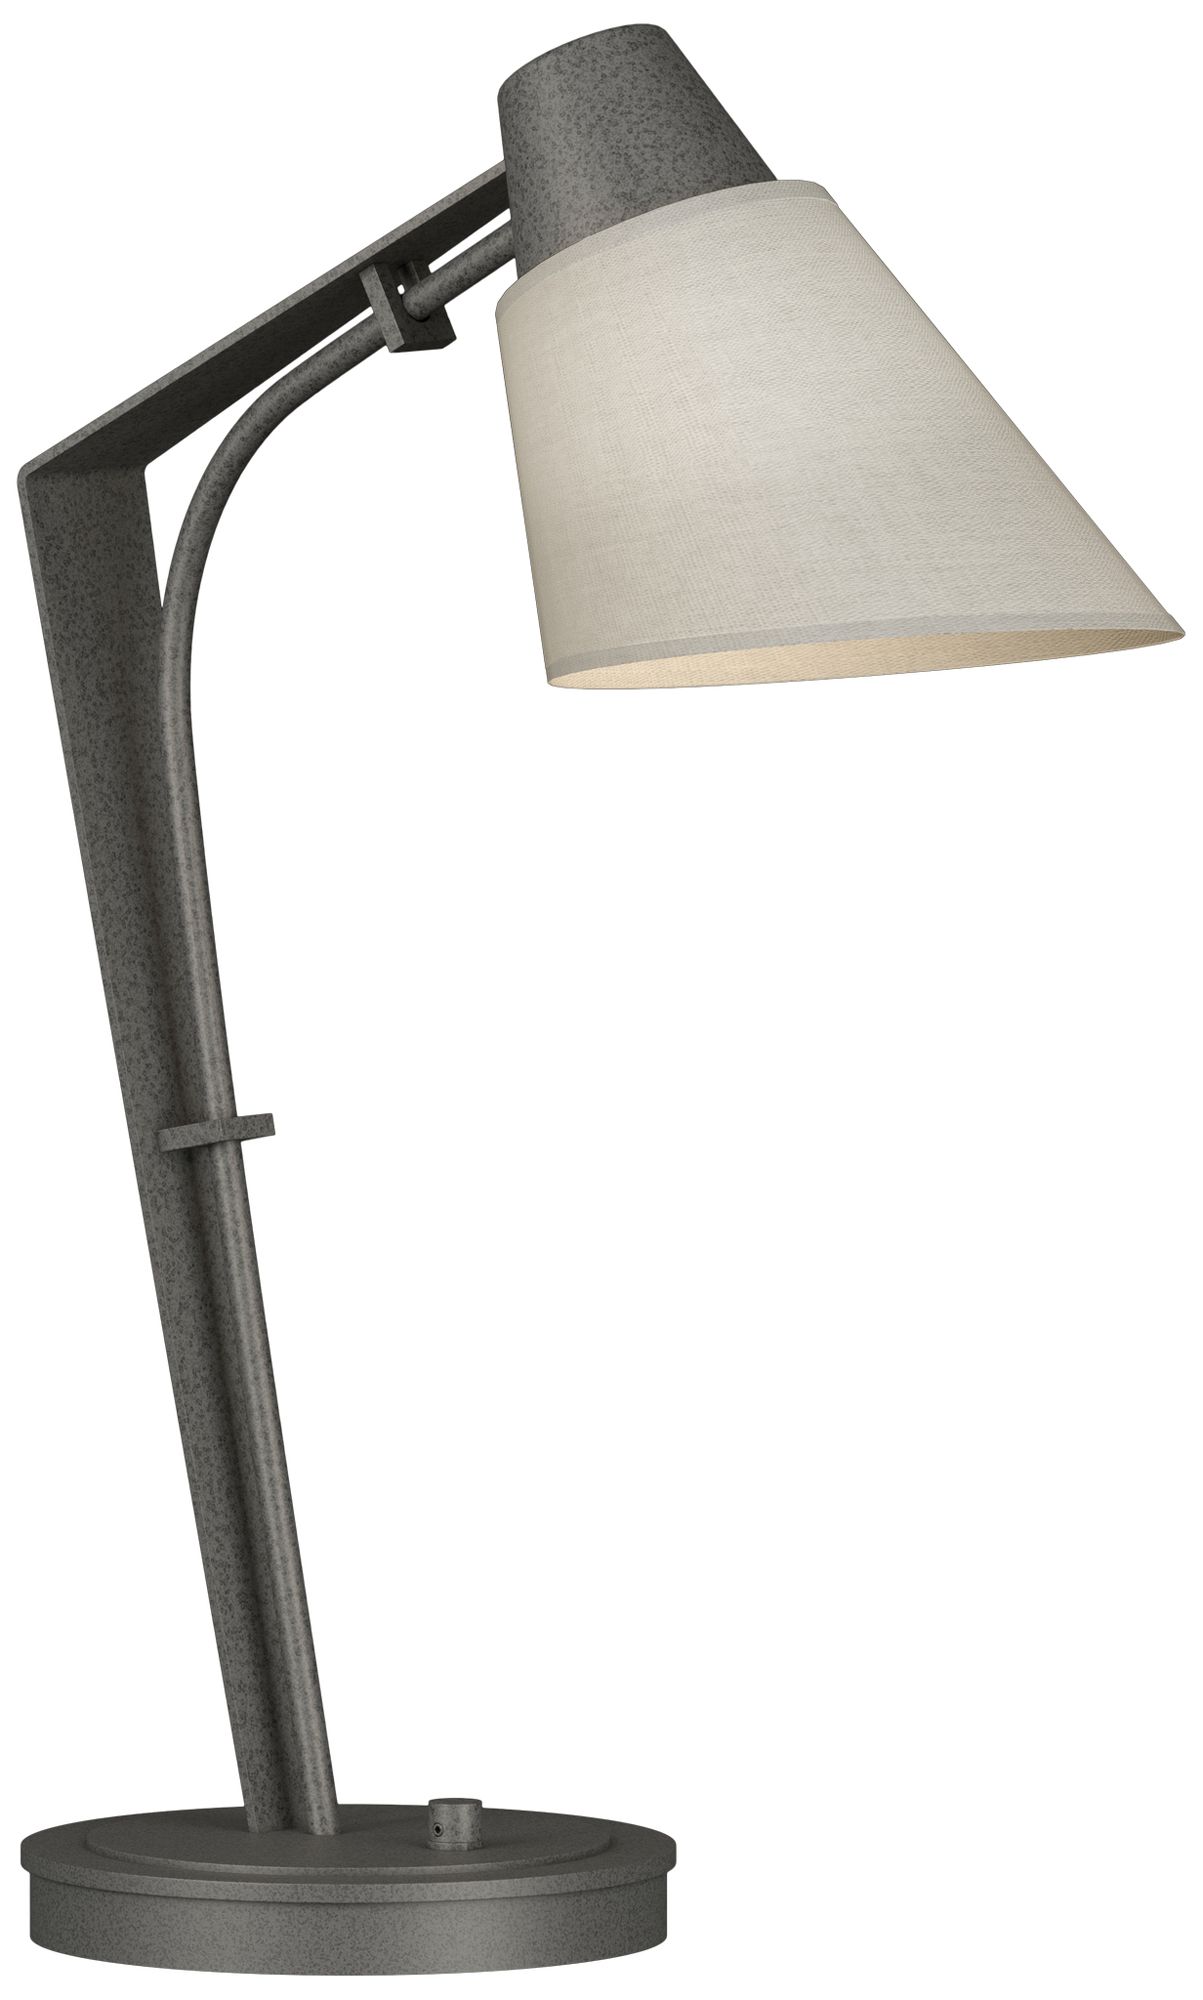 Reach 21.9" High Natural Iron Table Lamp With Light Grey Shade